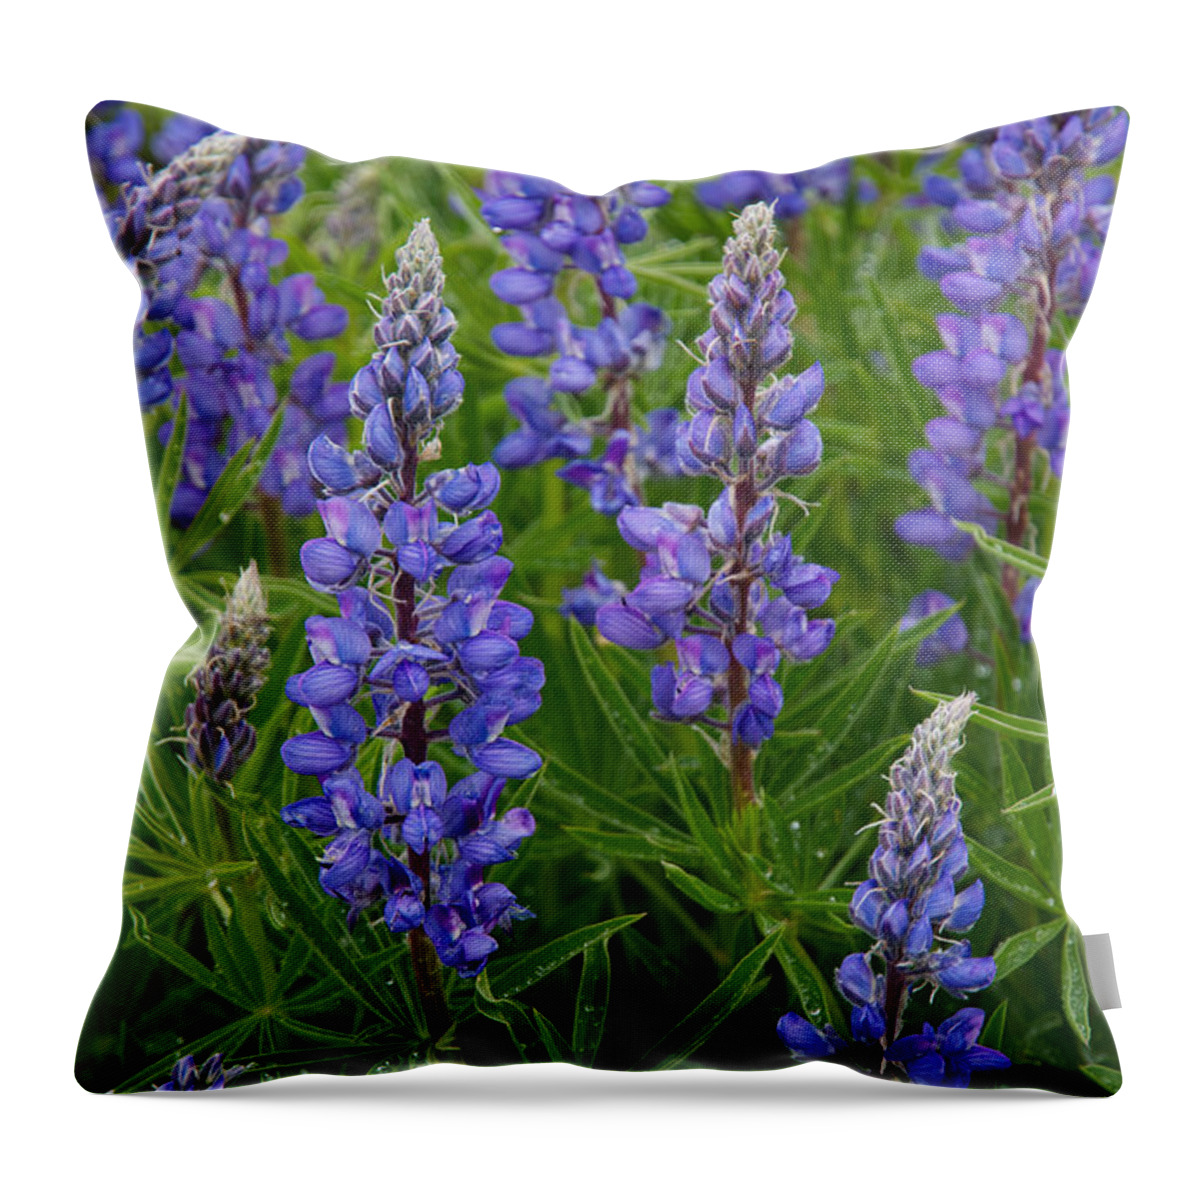 Lupine Throw Pillow featuring the photograph Lupine Wildflowers by Aaron Spong